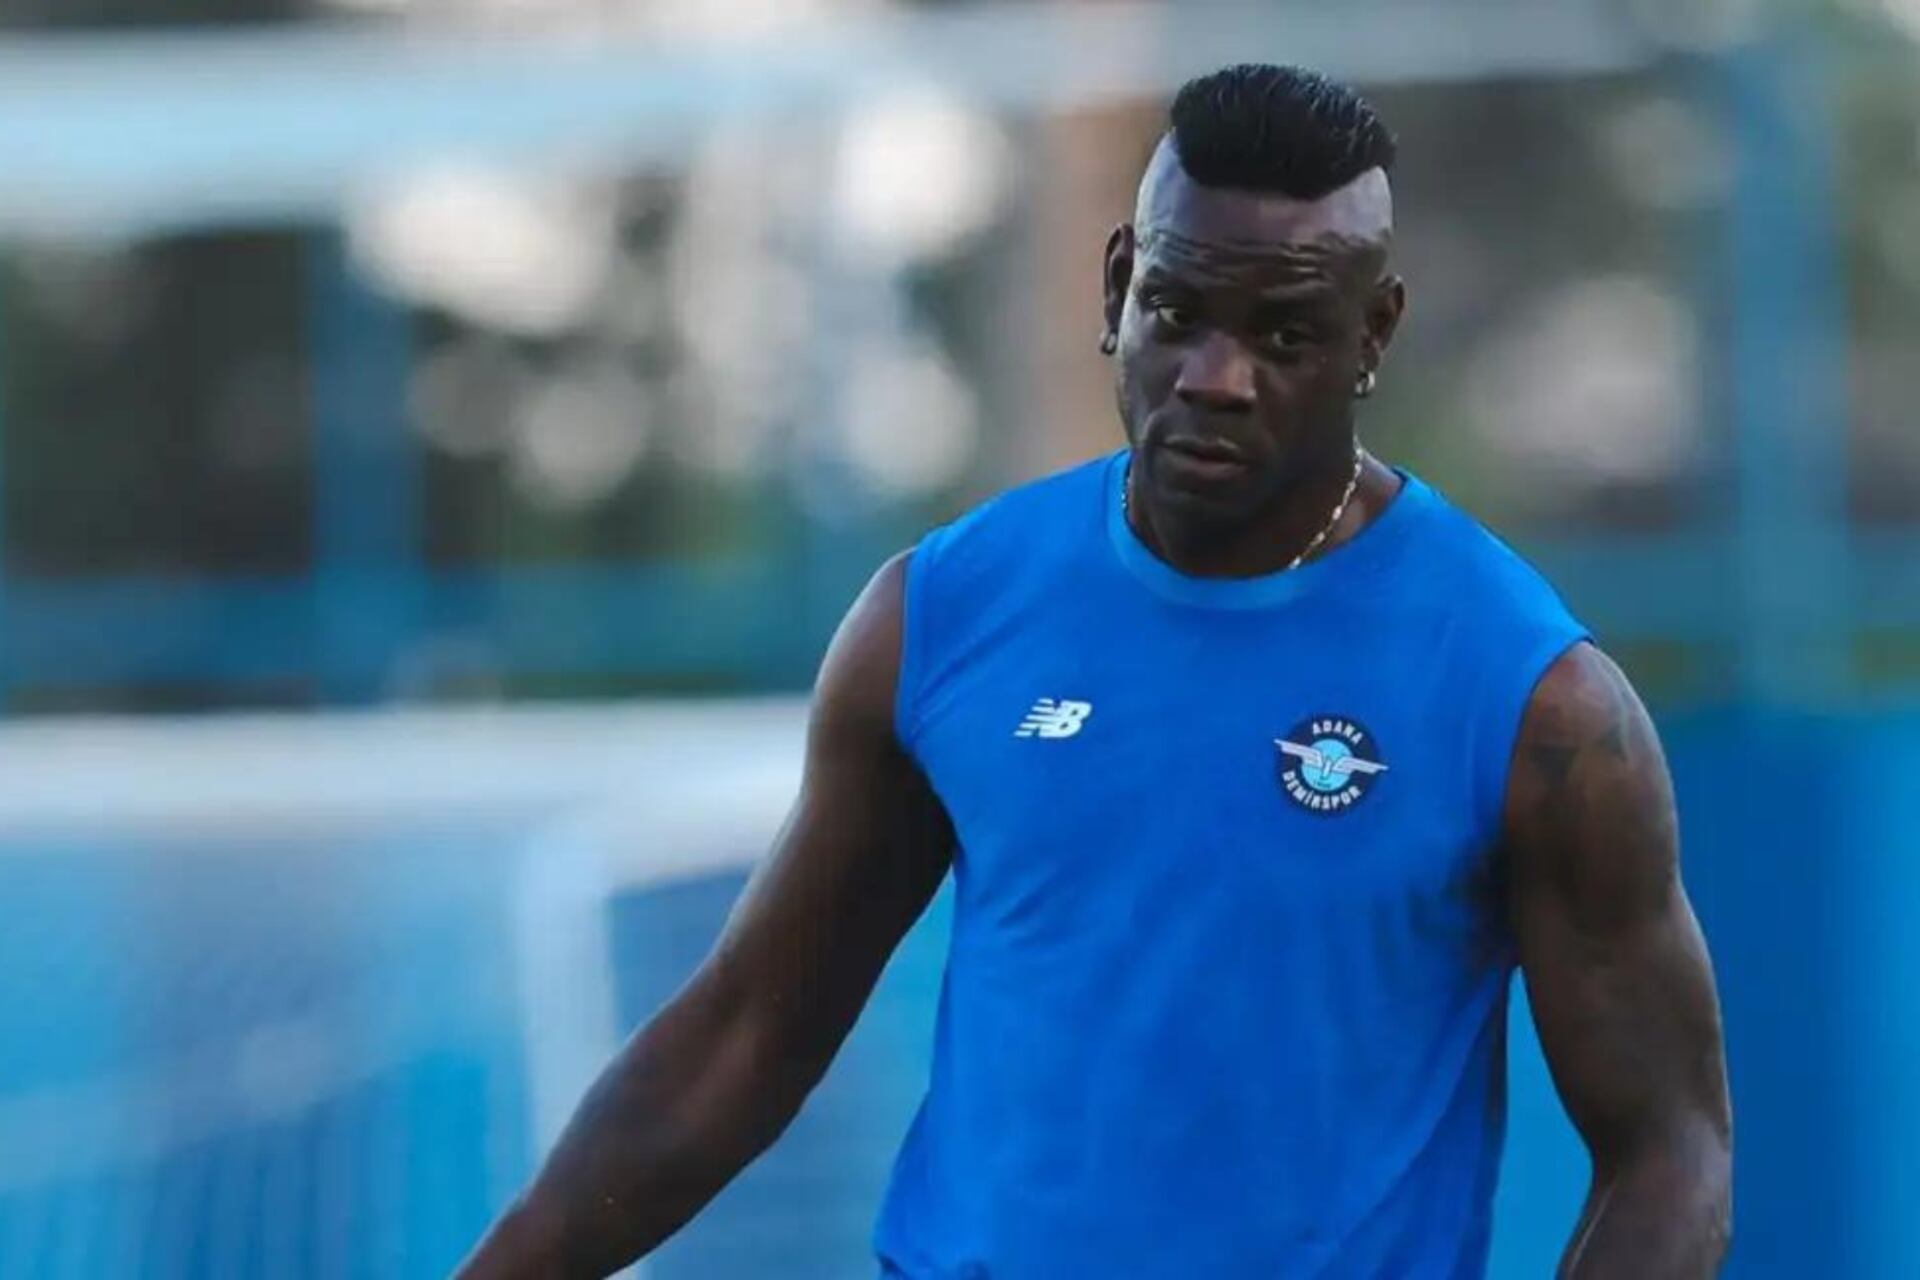 Mario Balotelli to start an exotic and unexpected new adventure